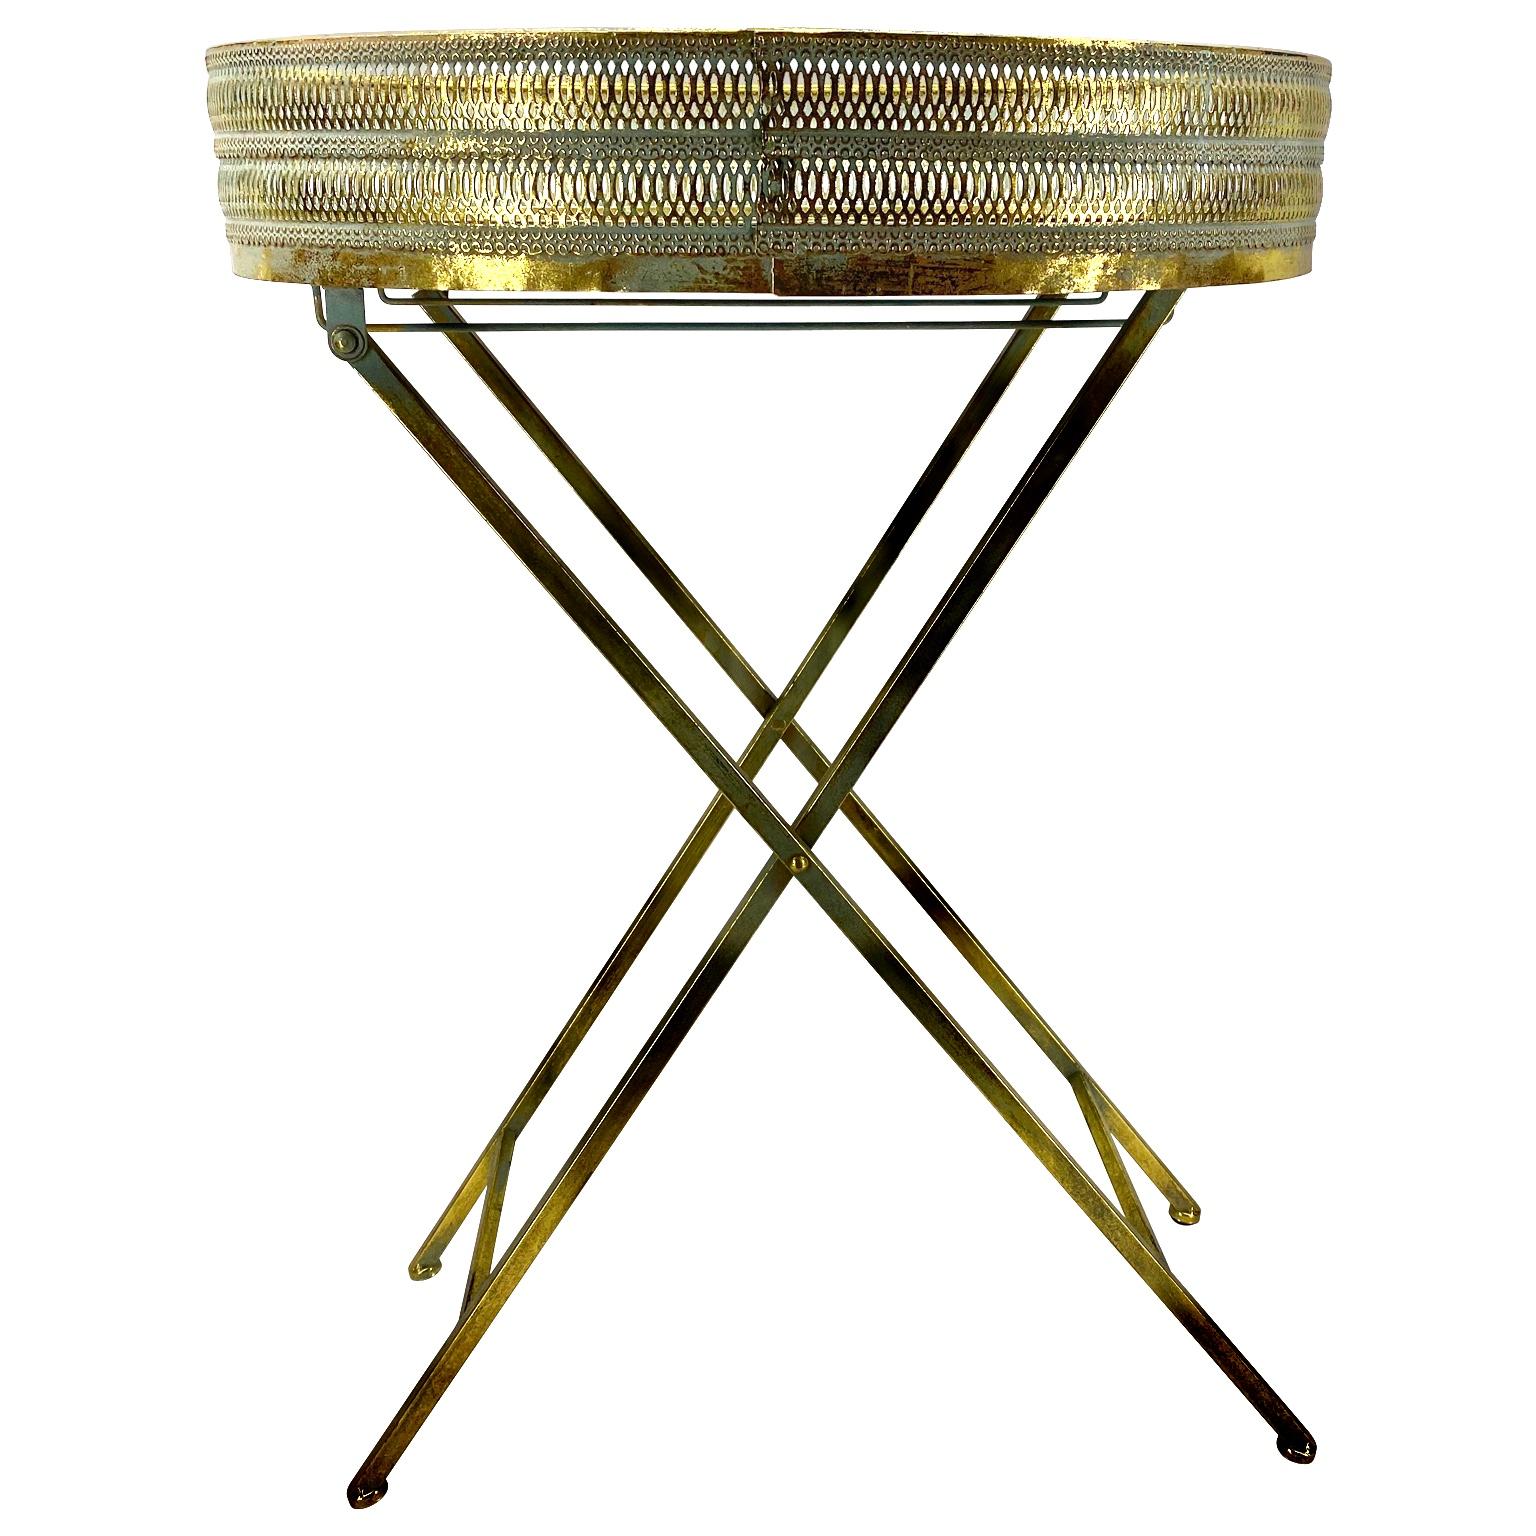 Small oval Mid-Century Modern end table with fine brass mesh gallery.
The table is easily collapsable.